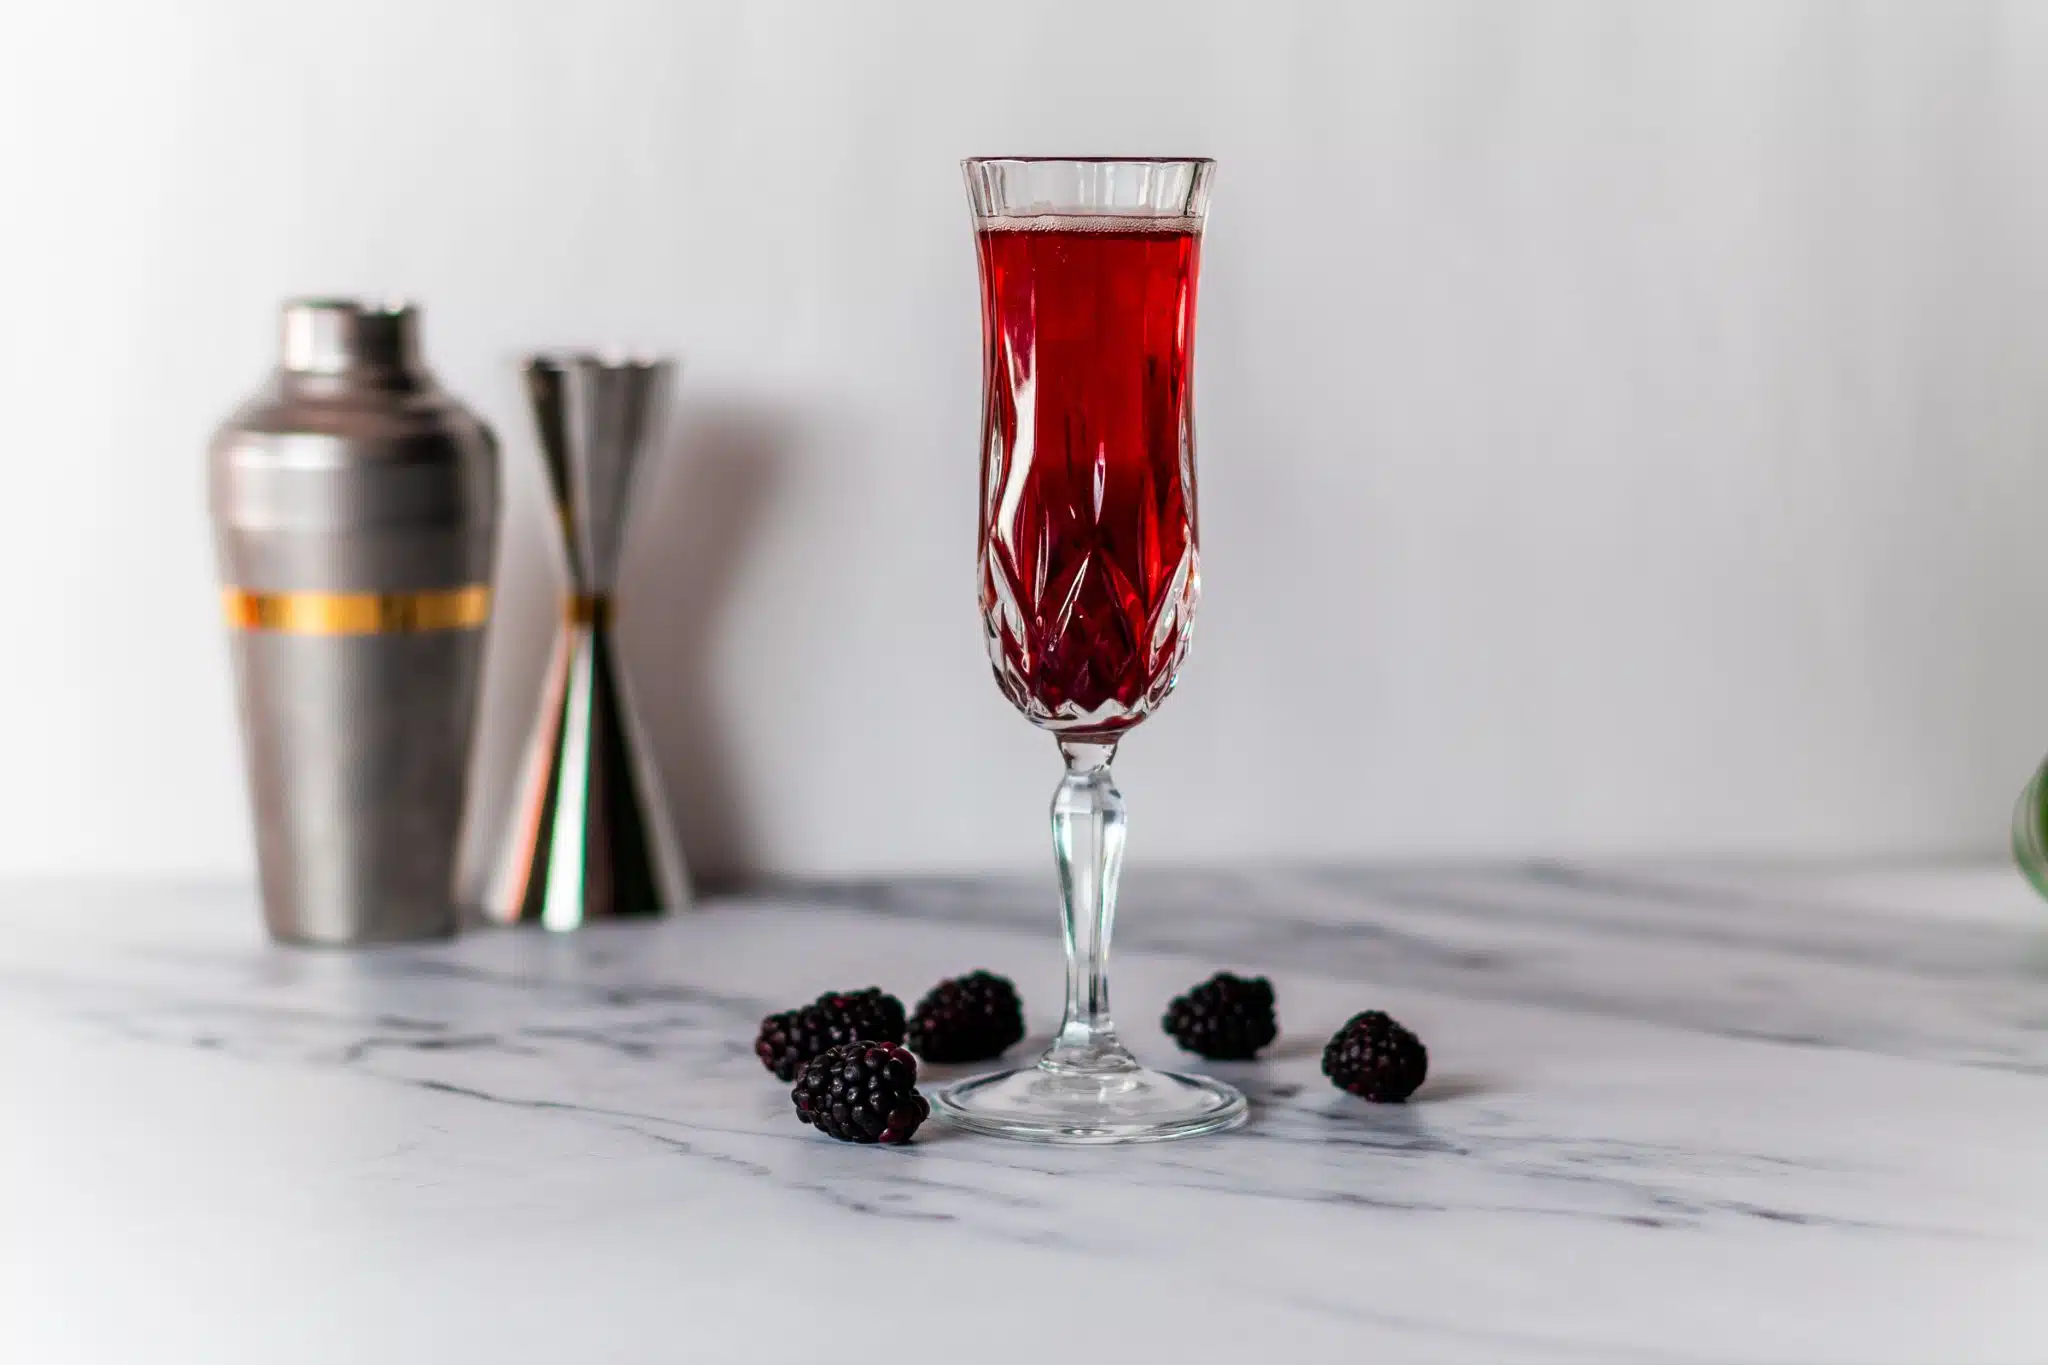 A side shot of a Kir Royal cocktail in a champagne flute on a white marmol table surrounded by berries and a shaker and a jigger on the background